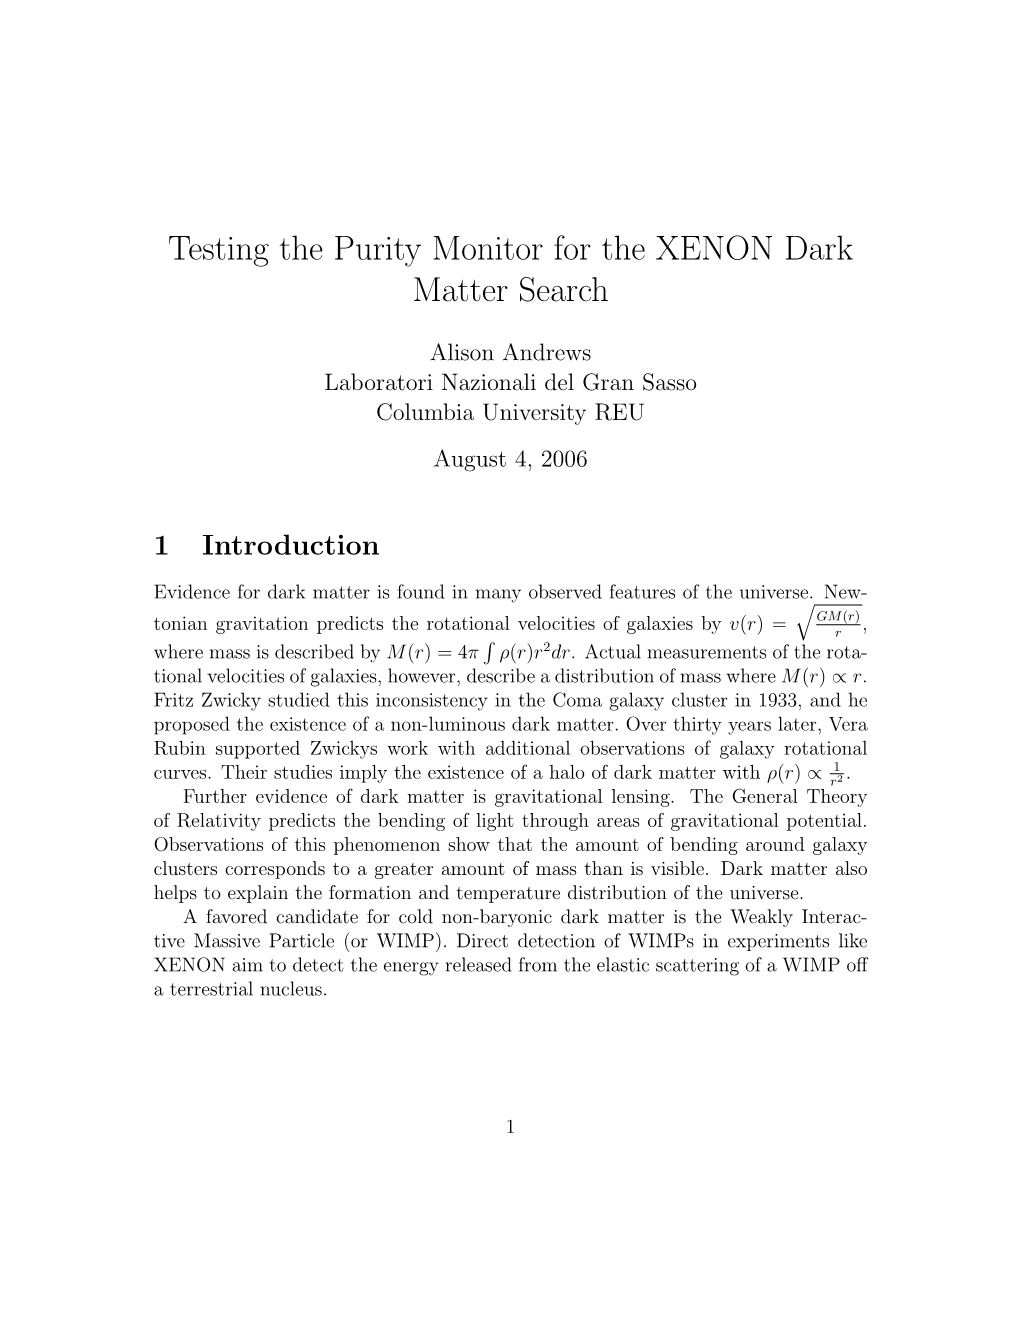 Testing the Purity Monitor for the XENON Dark Matter Search